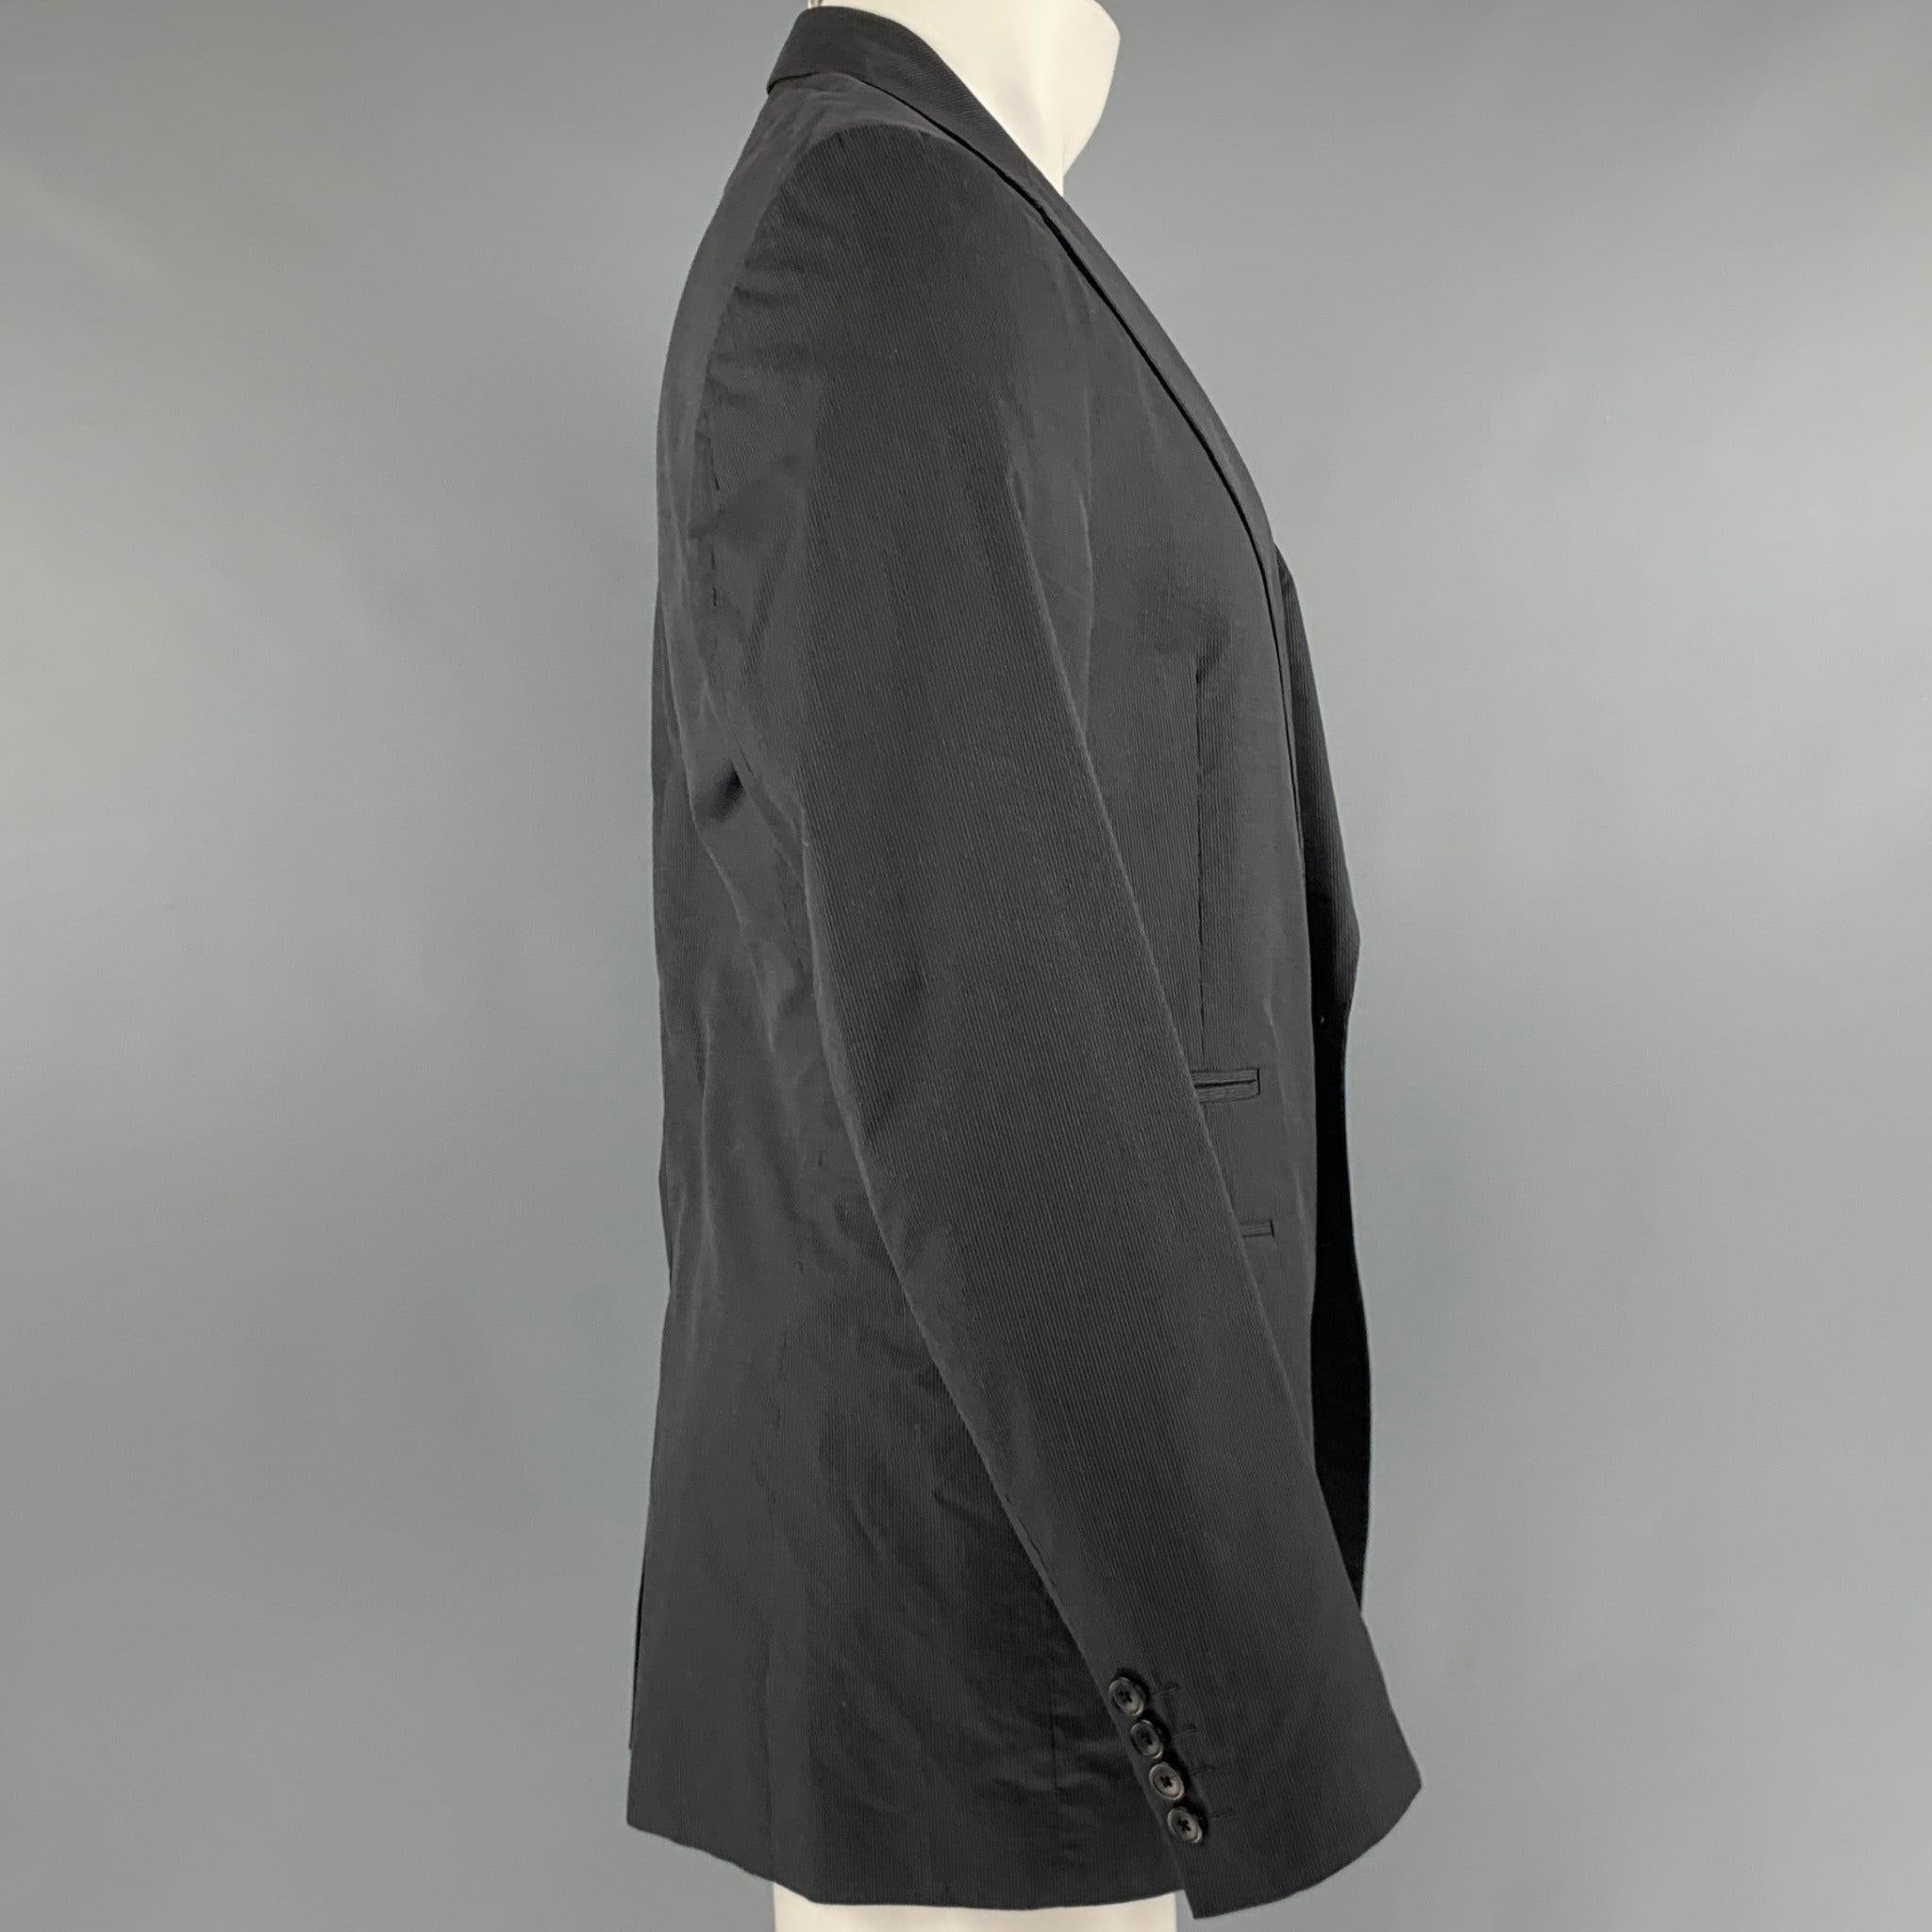 DRIES VAN NOTEN sport coat
in a black cotton fabric featuring grey stripe pattern, notch lapel, and double button closure.Very Good Pre-Owned Condition. Marks on back and minor mark on front. 

Marked:   50 

Measurements: 
 
Shoulder: 17.5 inches